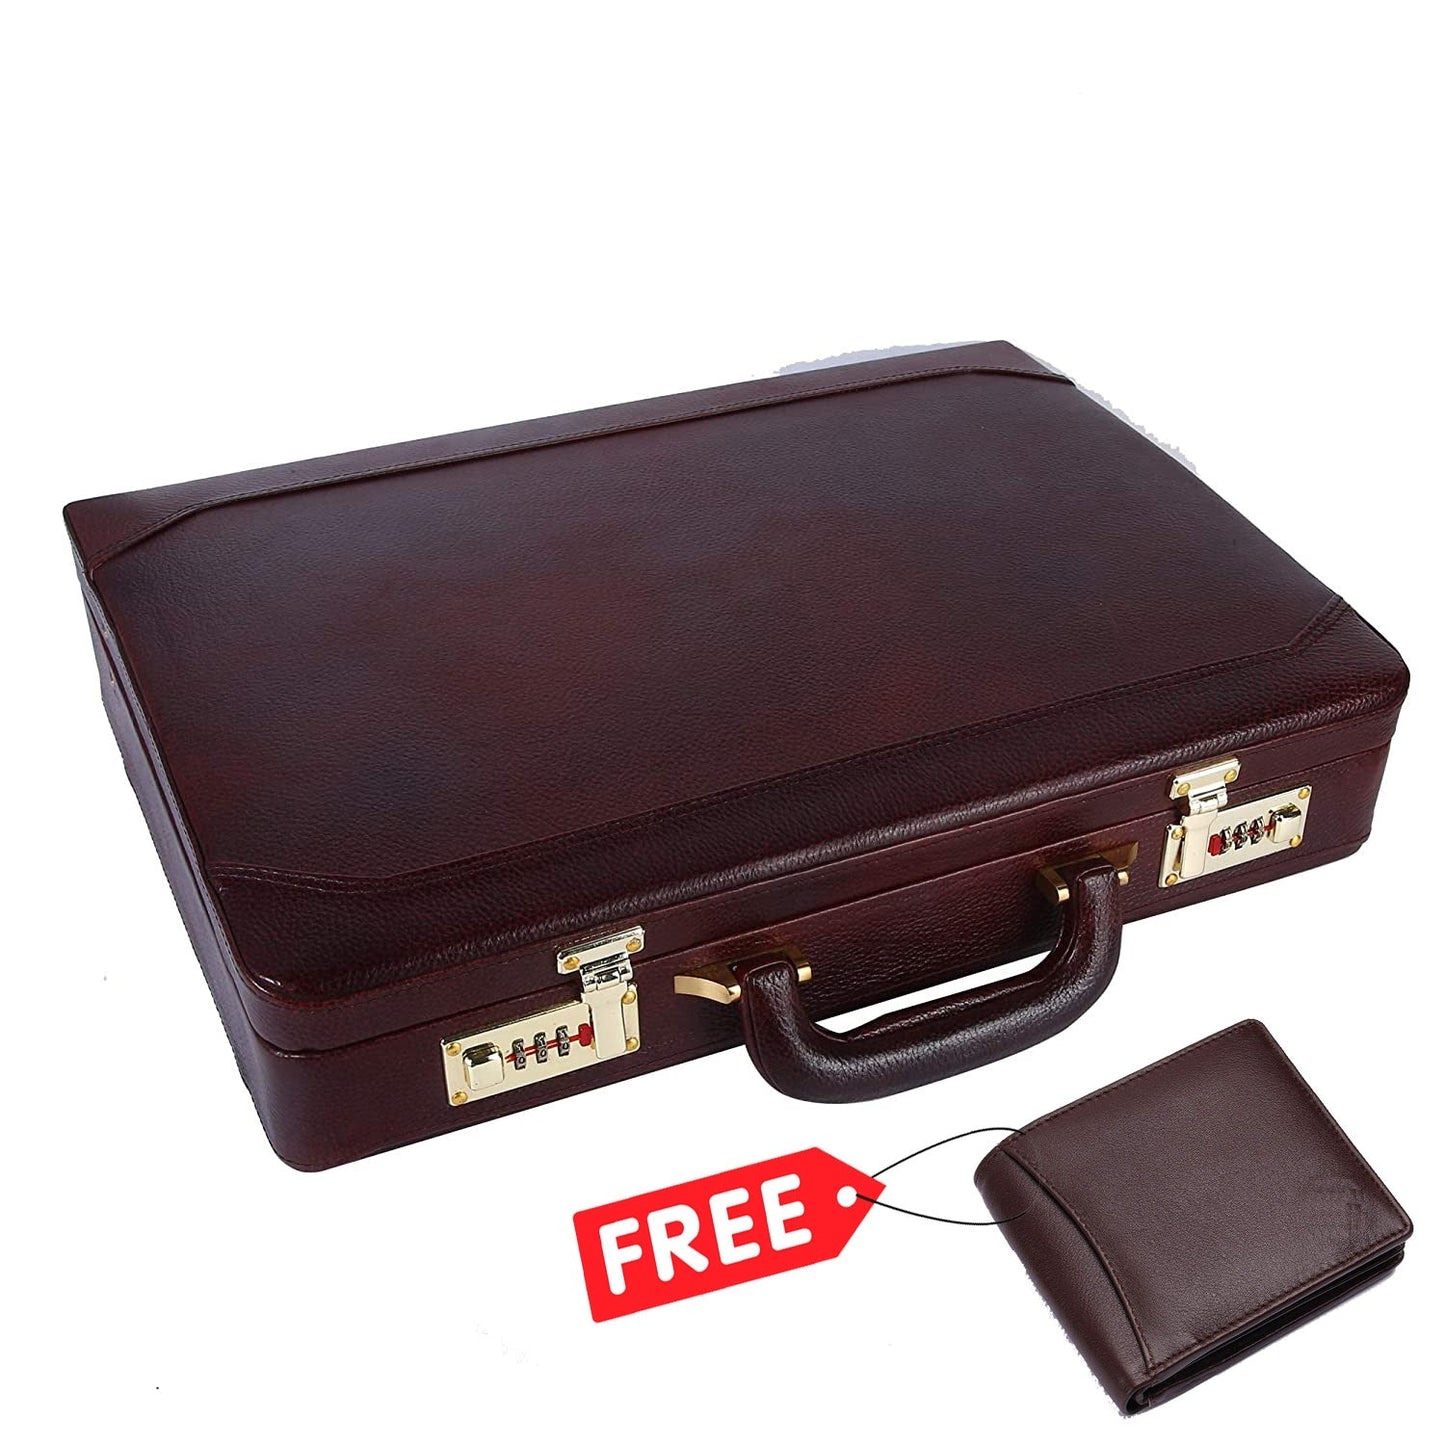 LEATHER BROWN BRIEFCASE ATTACHE OFFICE BAG